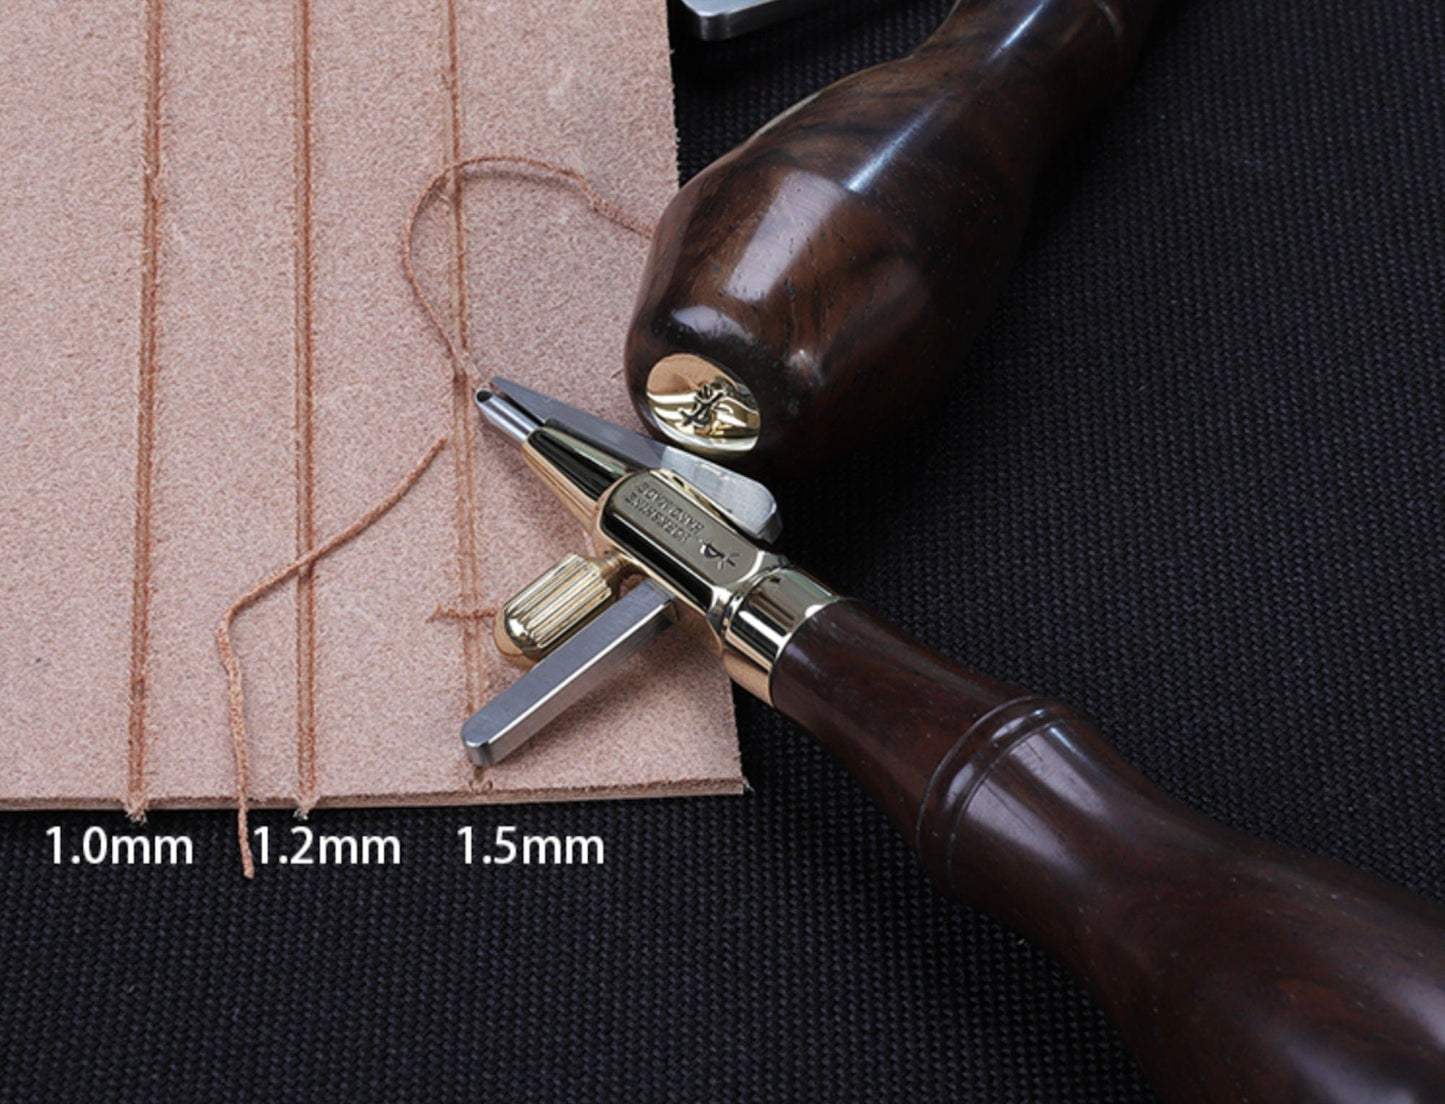 Leather Groover Tool, Multiple Grove Size 1.0, 1.5, 2.0 mm, Stitching Groover, Leather Craft Tool, Stitching Liner Grooving ToolYorkshine